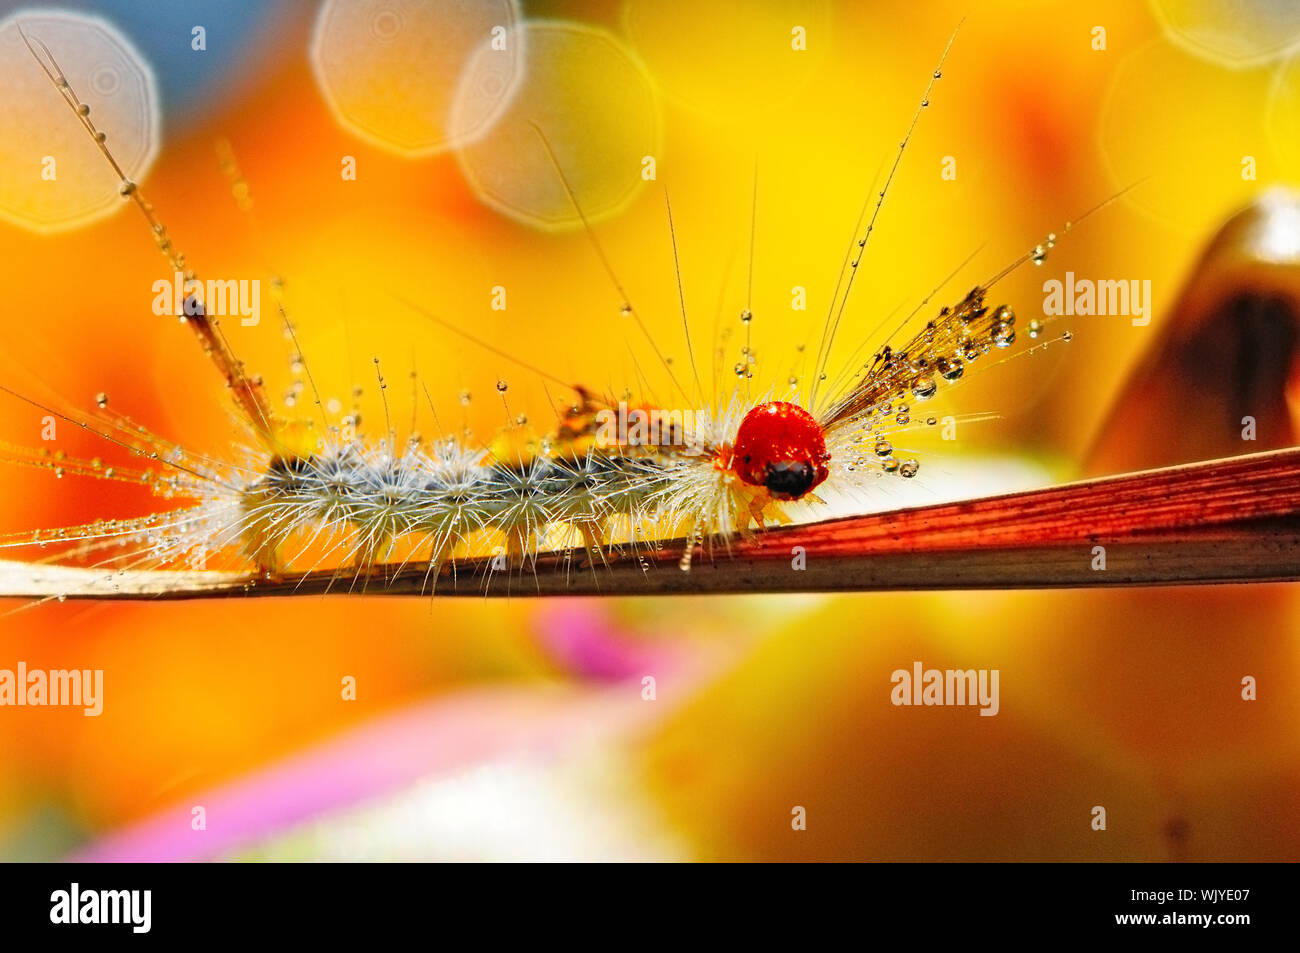 Hairy caterpillar on a leaf Stock Photo